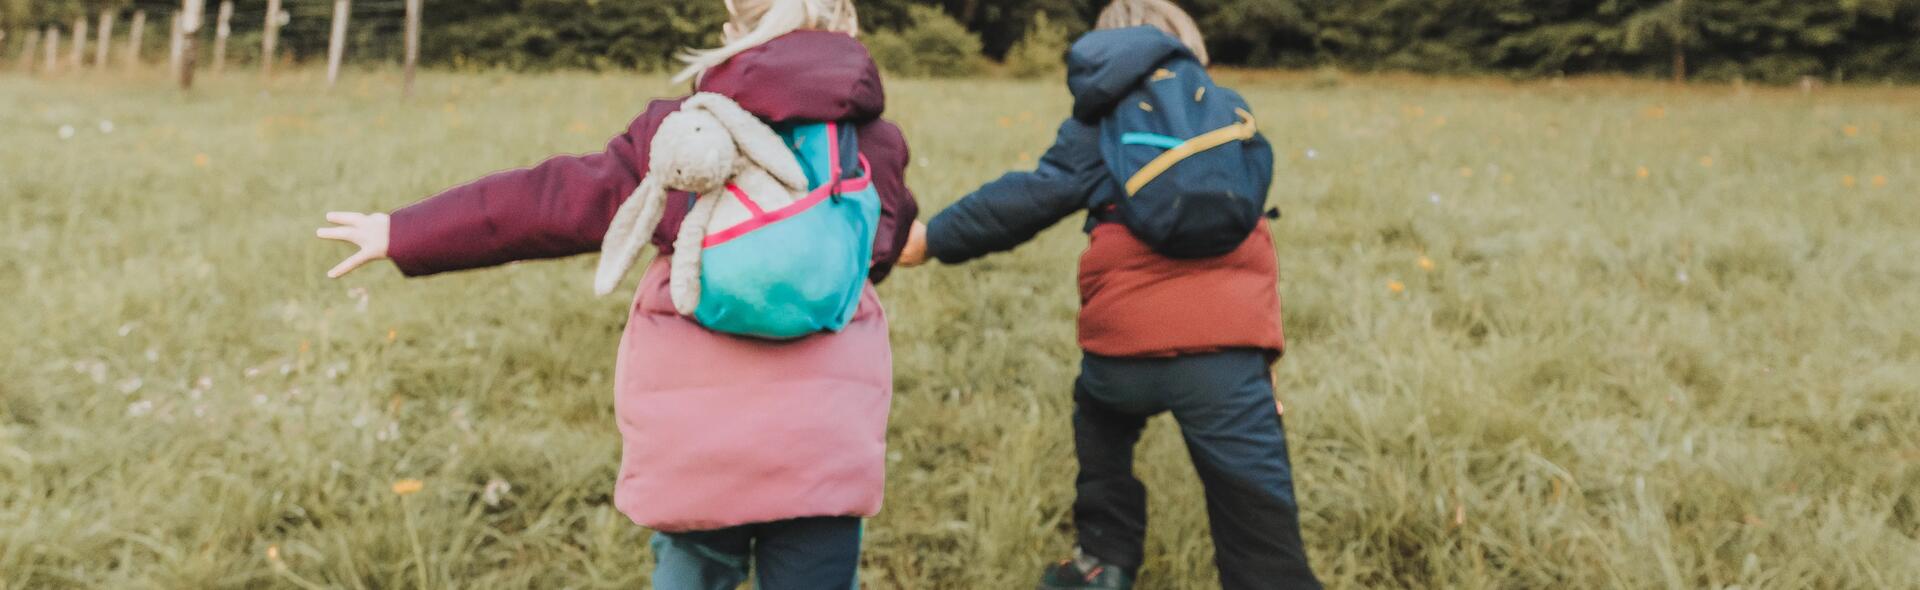 activities to keep your children busy during hikes and walks